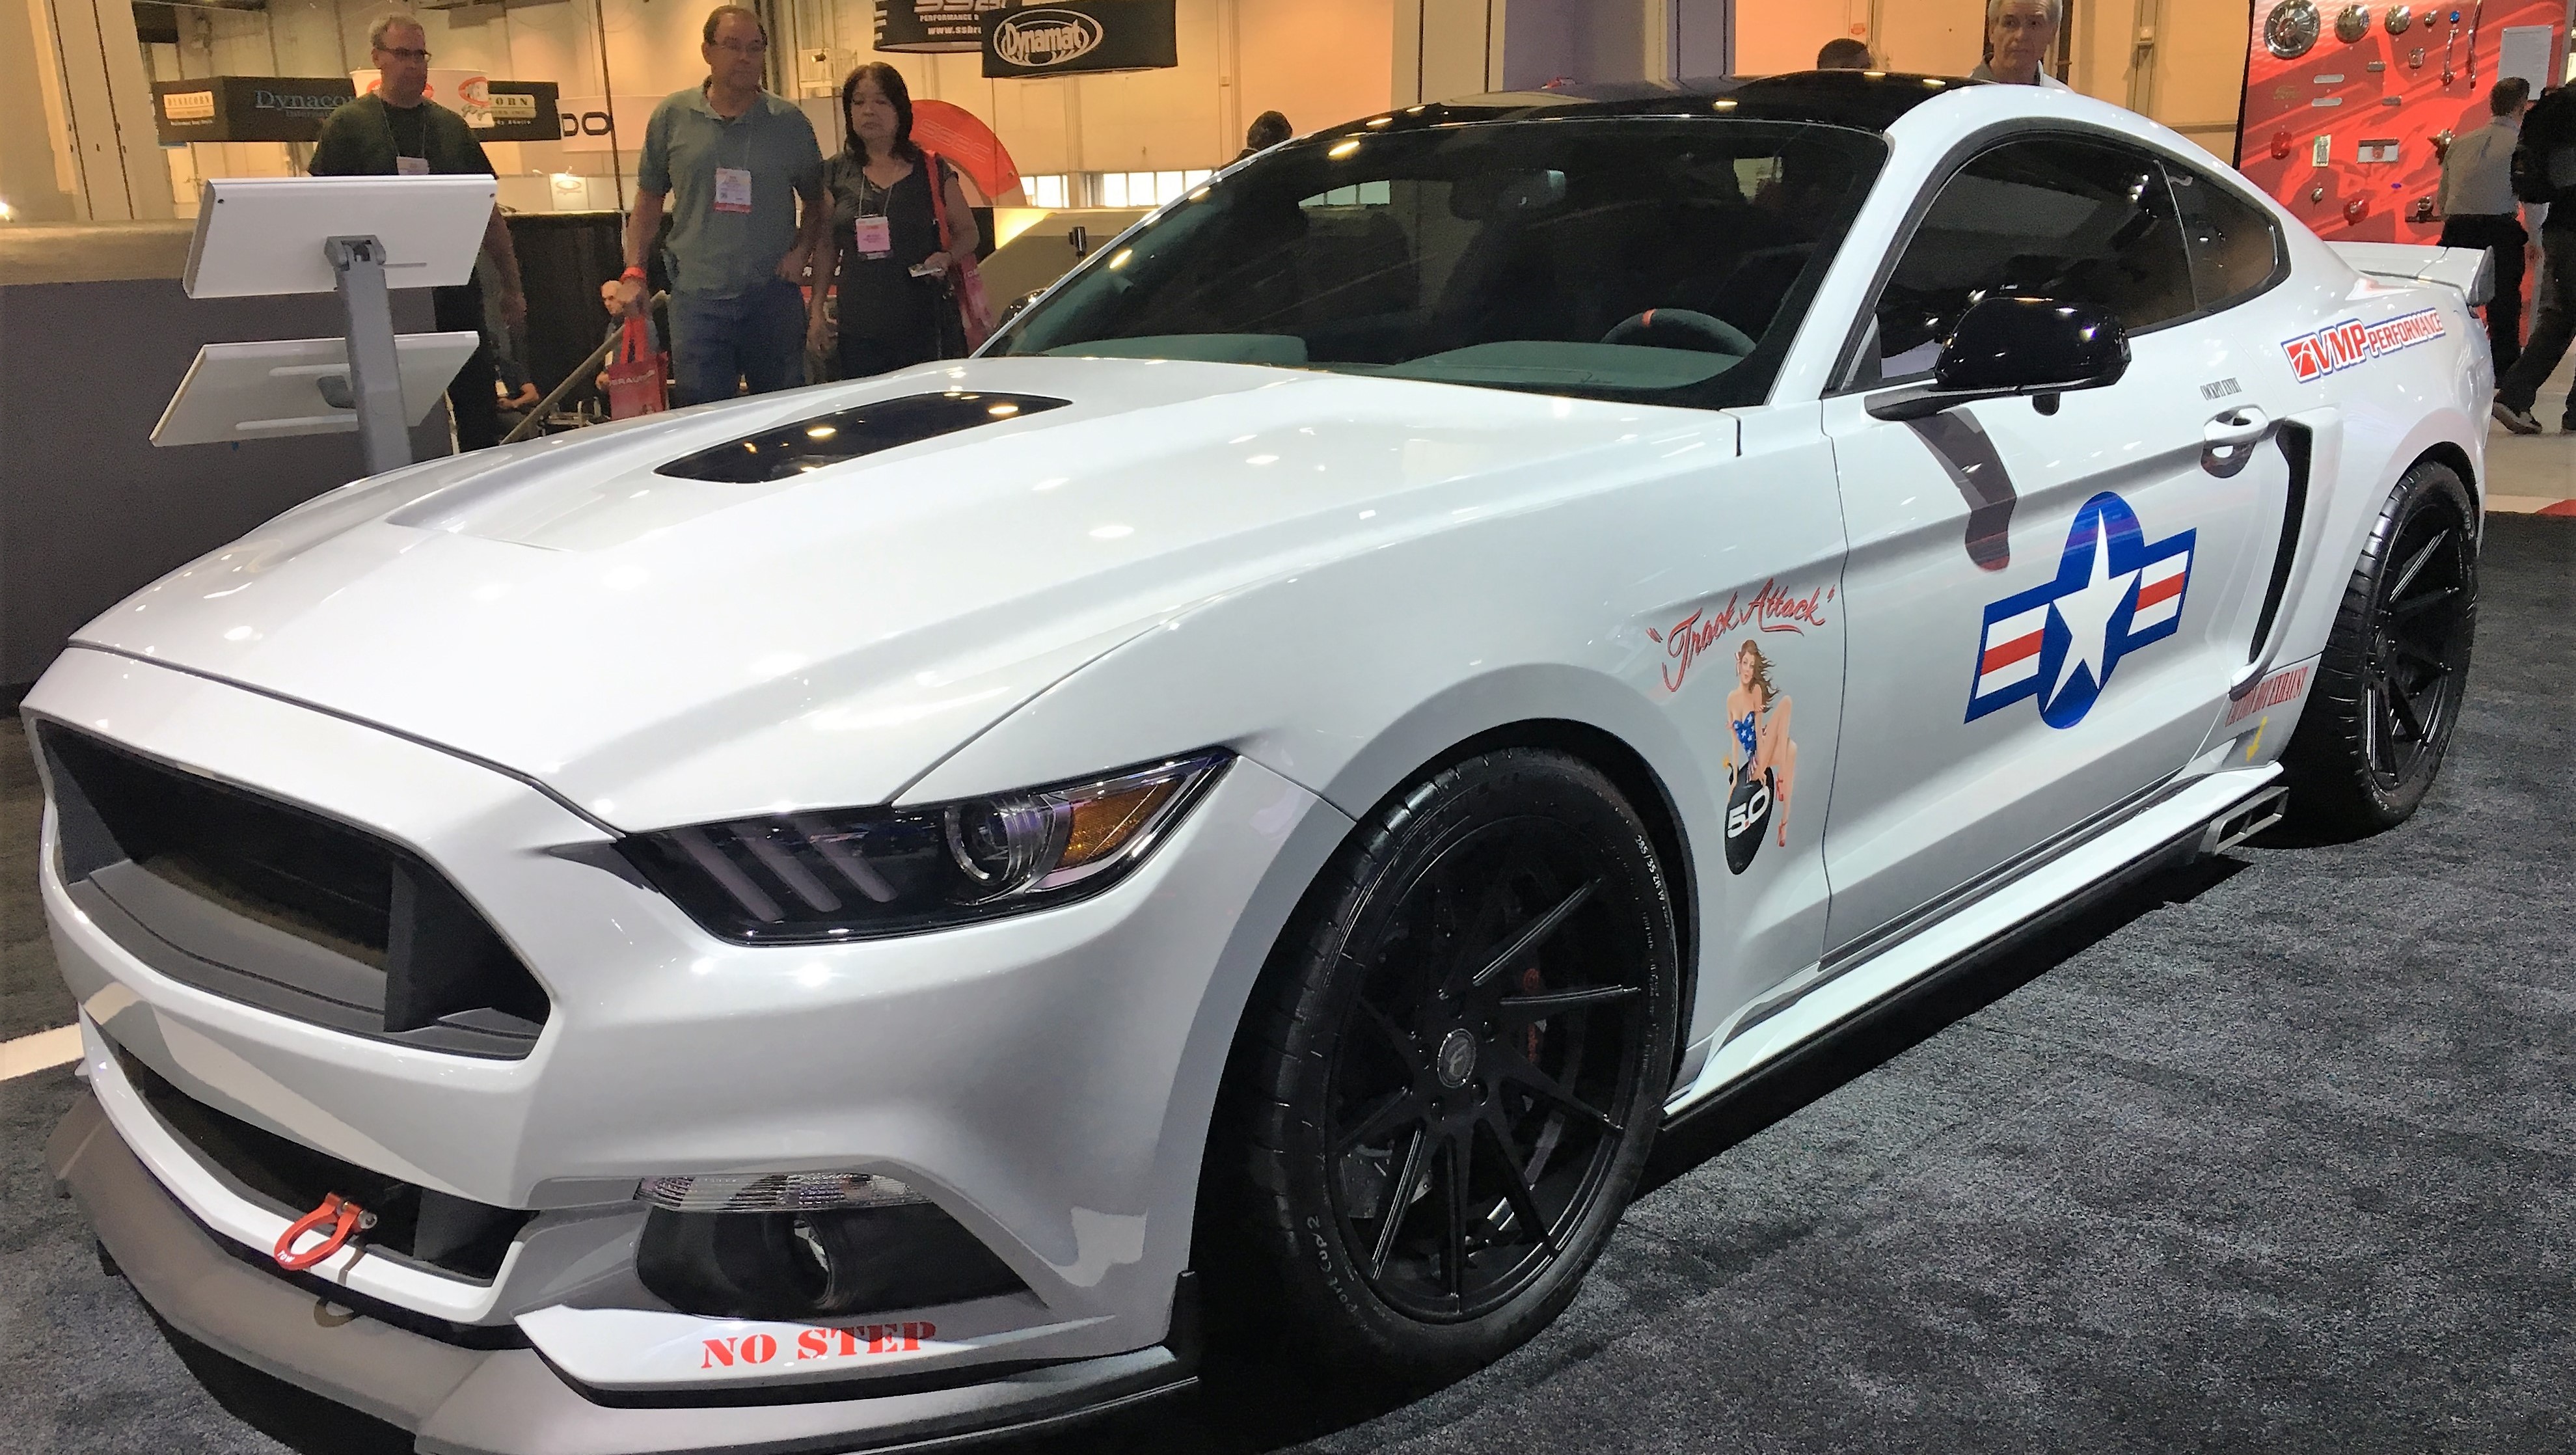 More from SEMA!